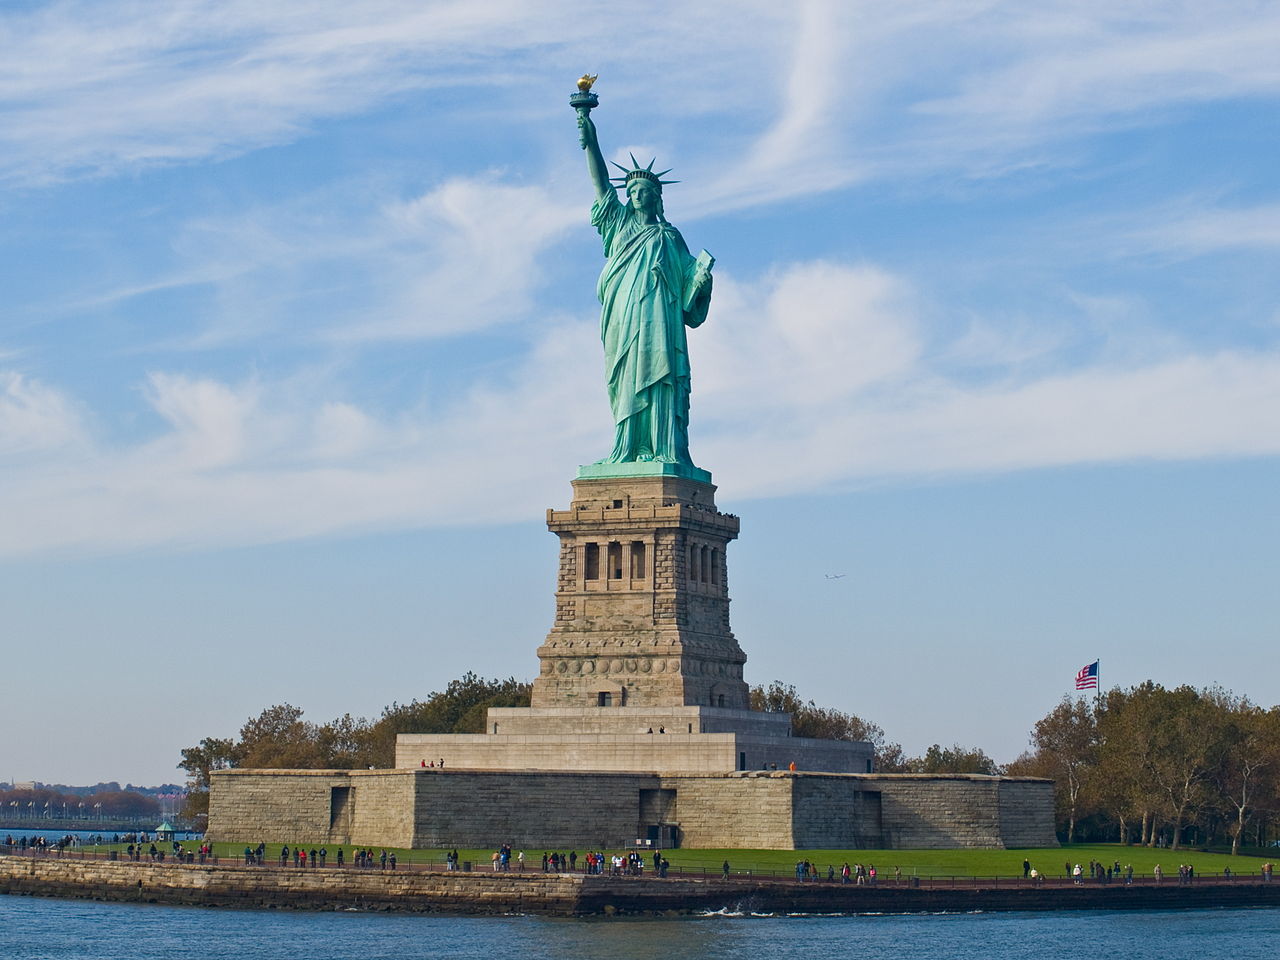 Statue of Liberty. Photo by William Warby (originally posted to Flickr as Statue of Liberty) [CC BY 2.0 (http://creativecommons.org/licenses/by/2.0)], via Wikimedia Commons